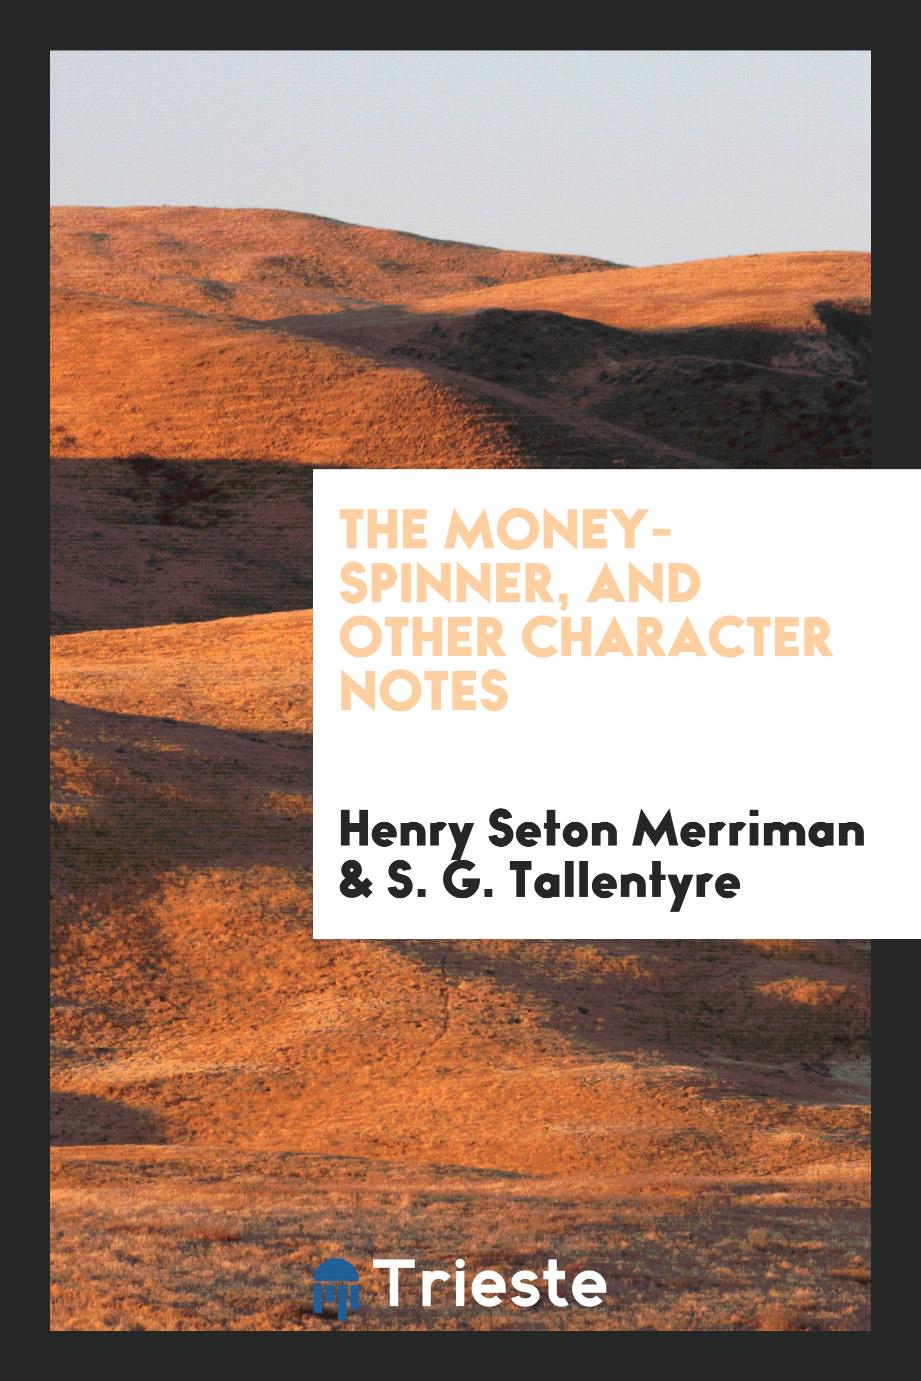 The money-spinner, and other character notes